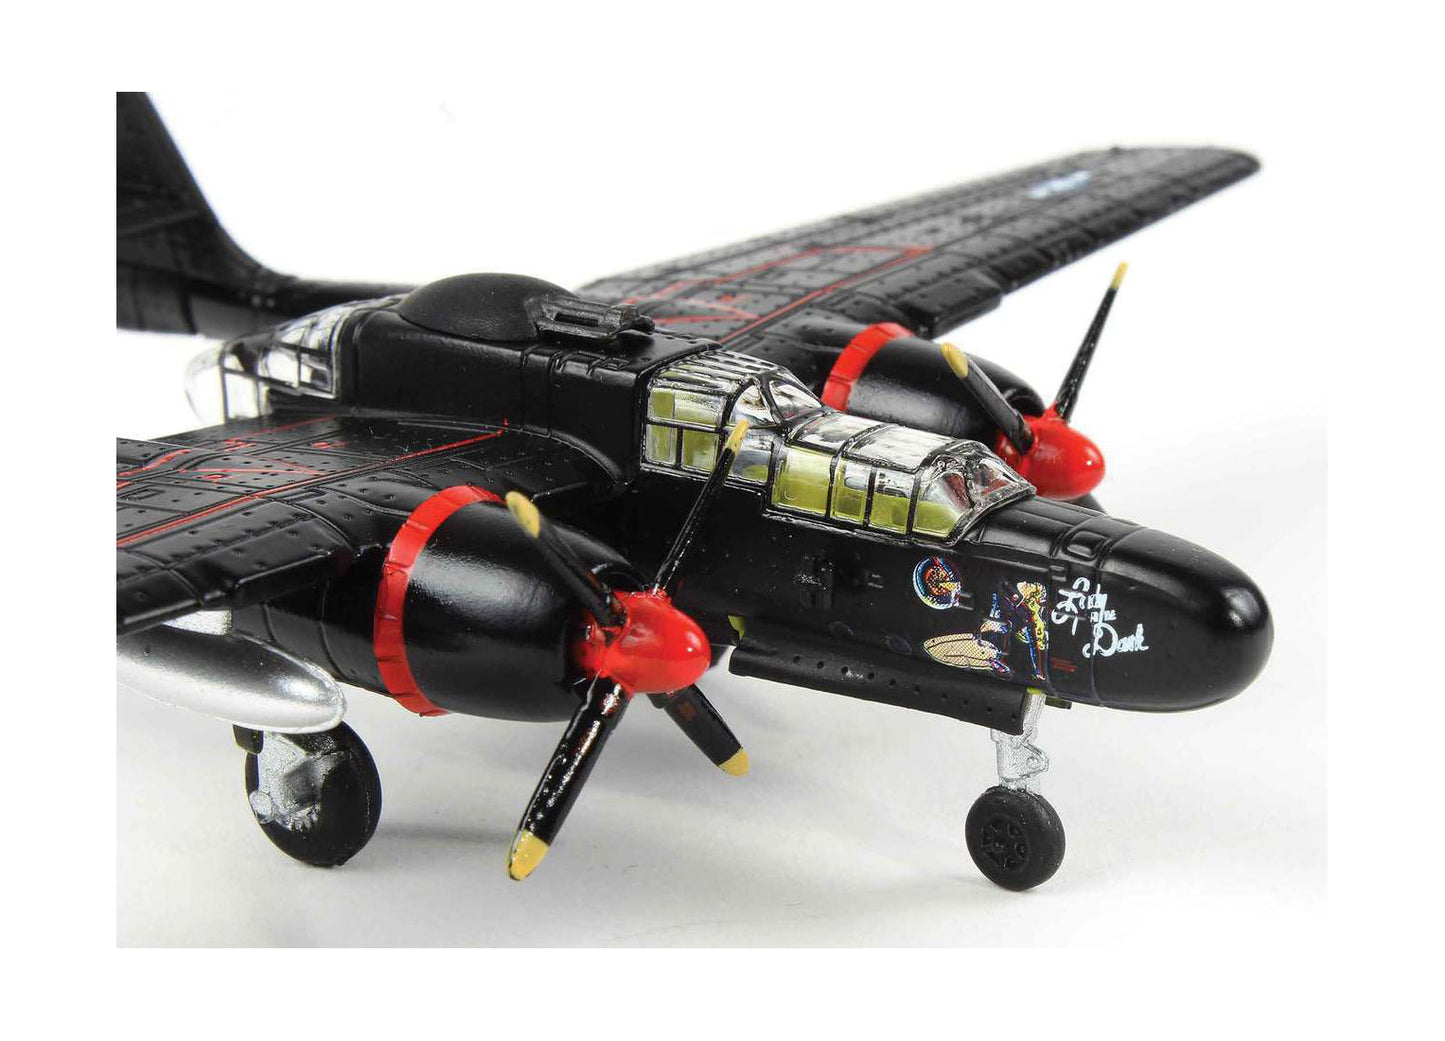 1/144 United States Army Air Forces P-61B Black Widow Lady in the Dark,' Major Lee Kendall, 548th NFS, 1945 Air Force 1 Models AF1-0138